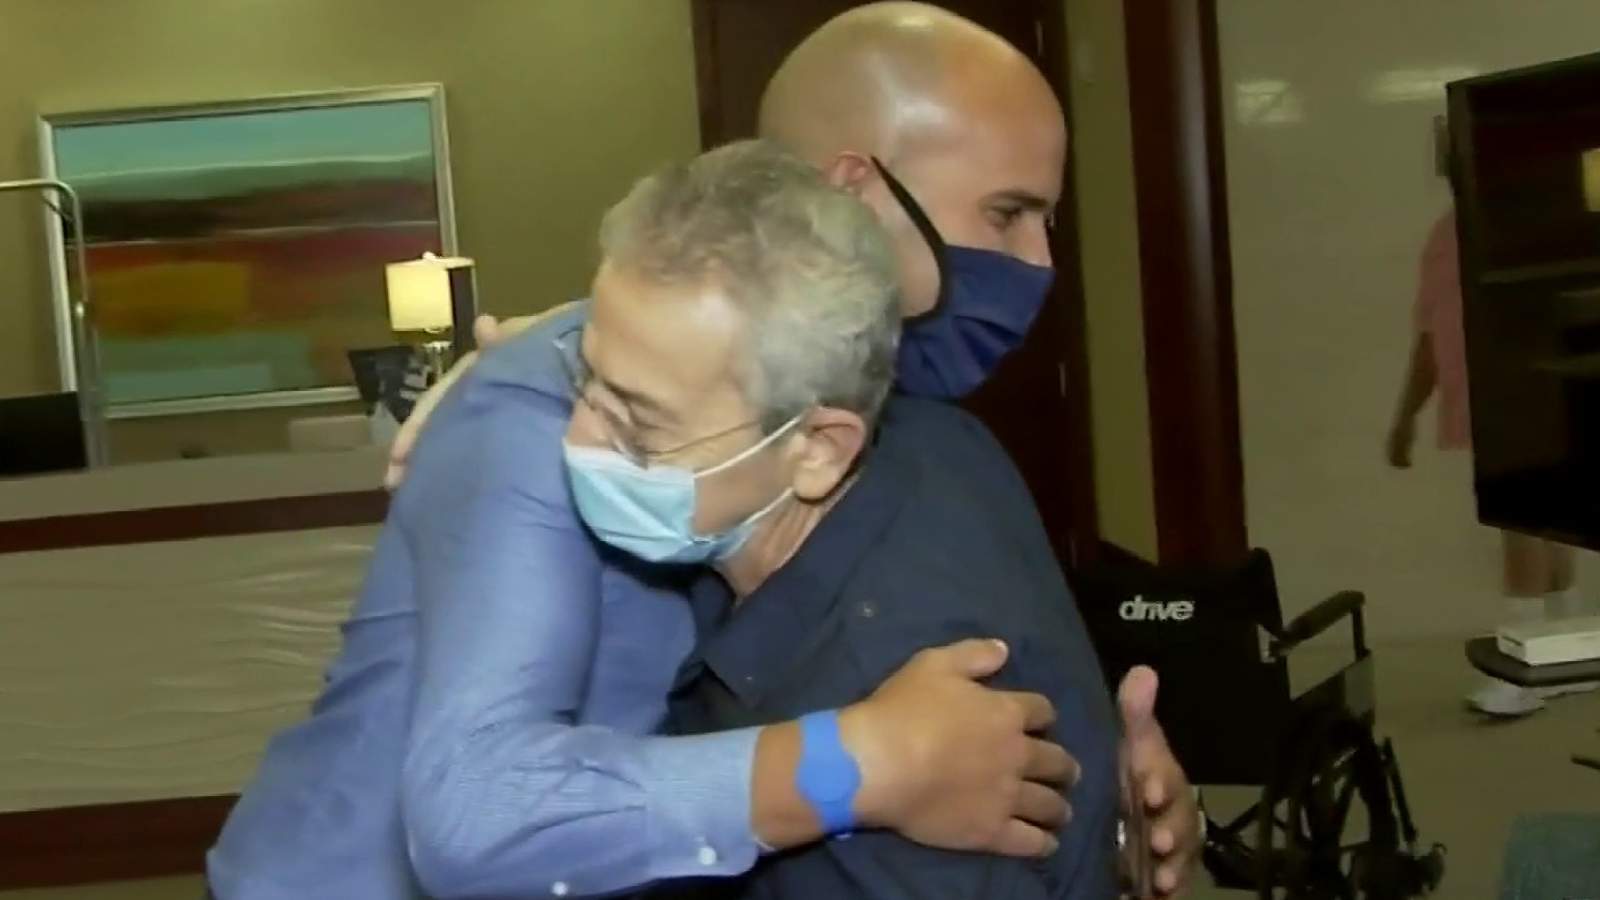 Man meets hotel employee who saved his life